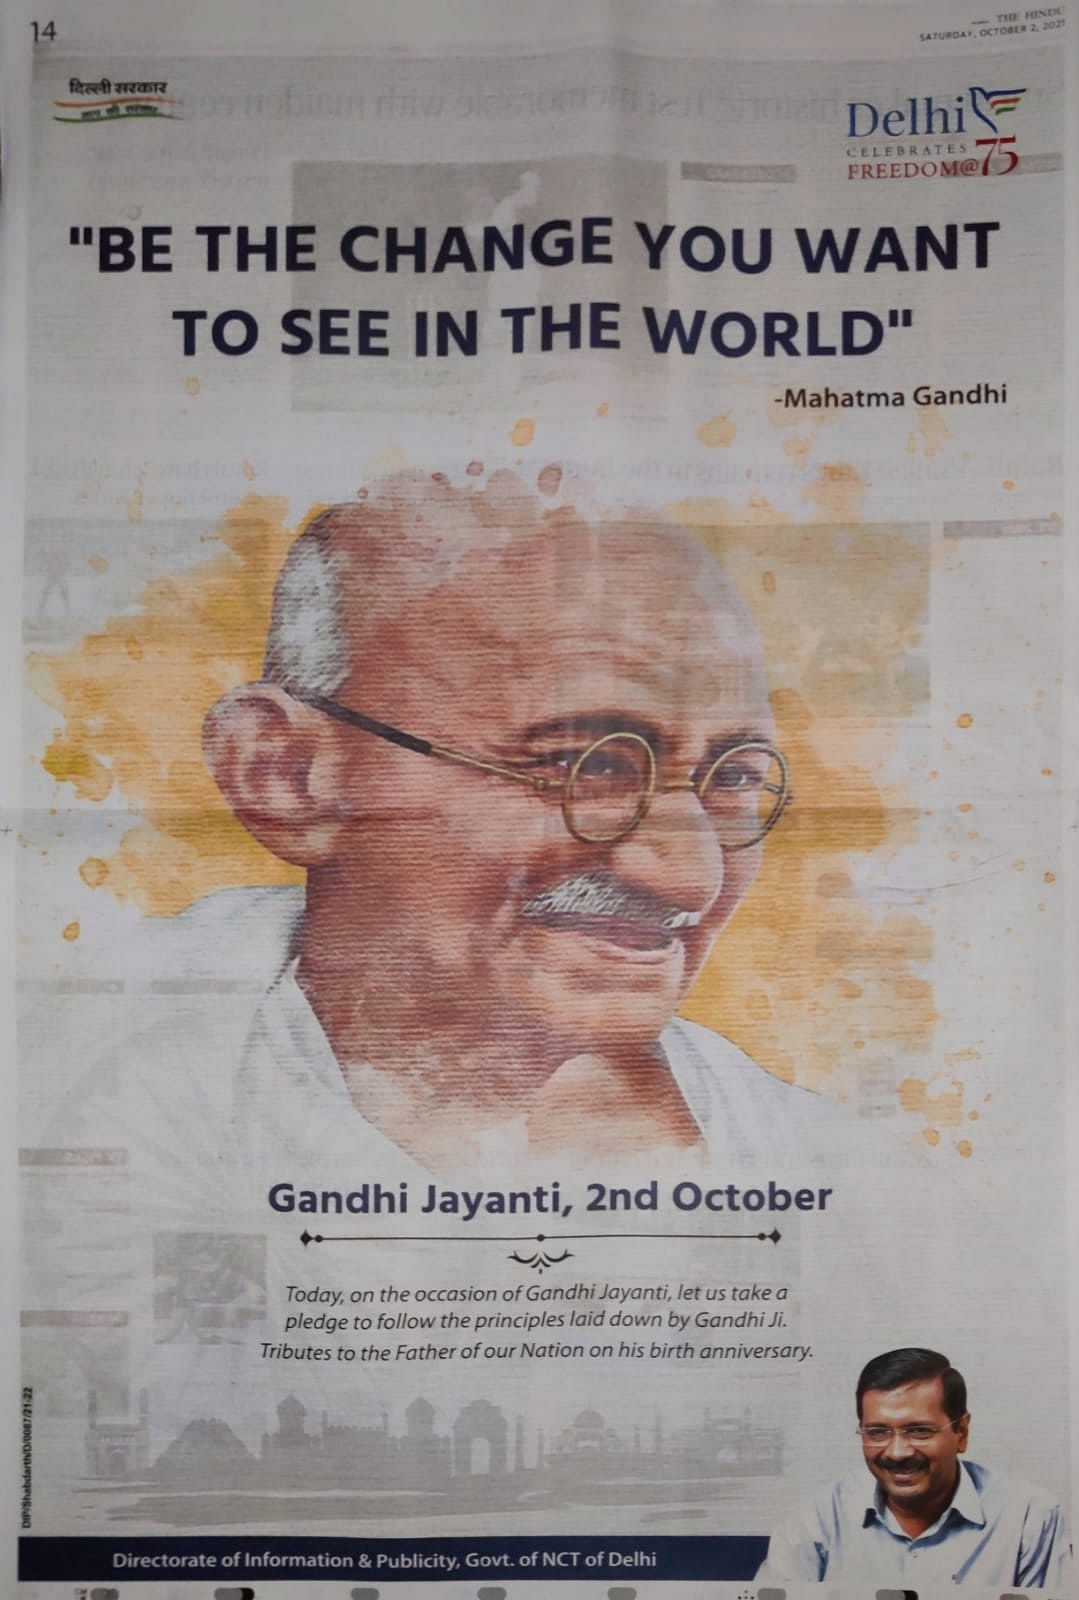 In the original advertisement, the photograph of Mahatma Gandhi was at the centre in a much larger size.